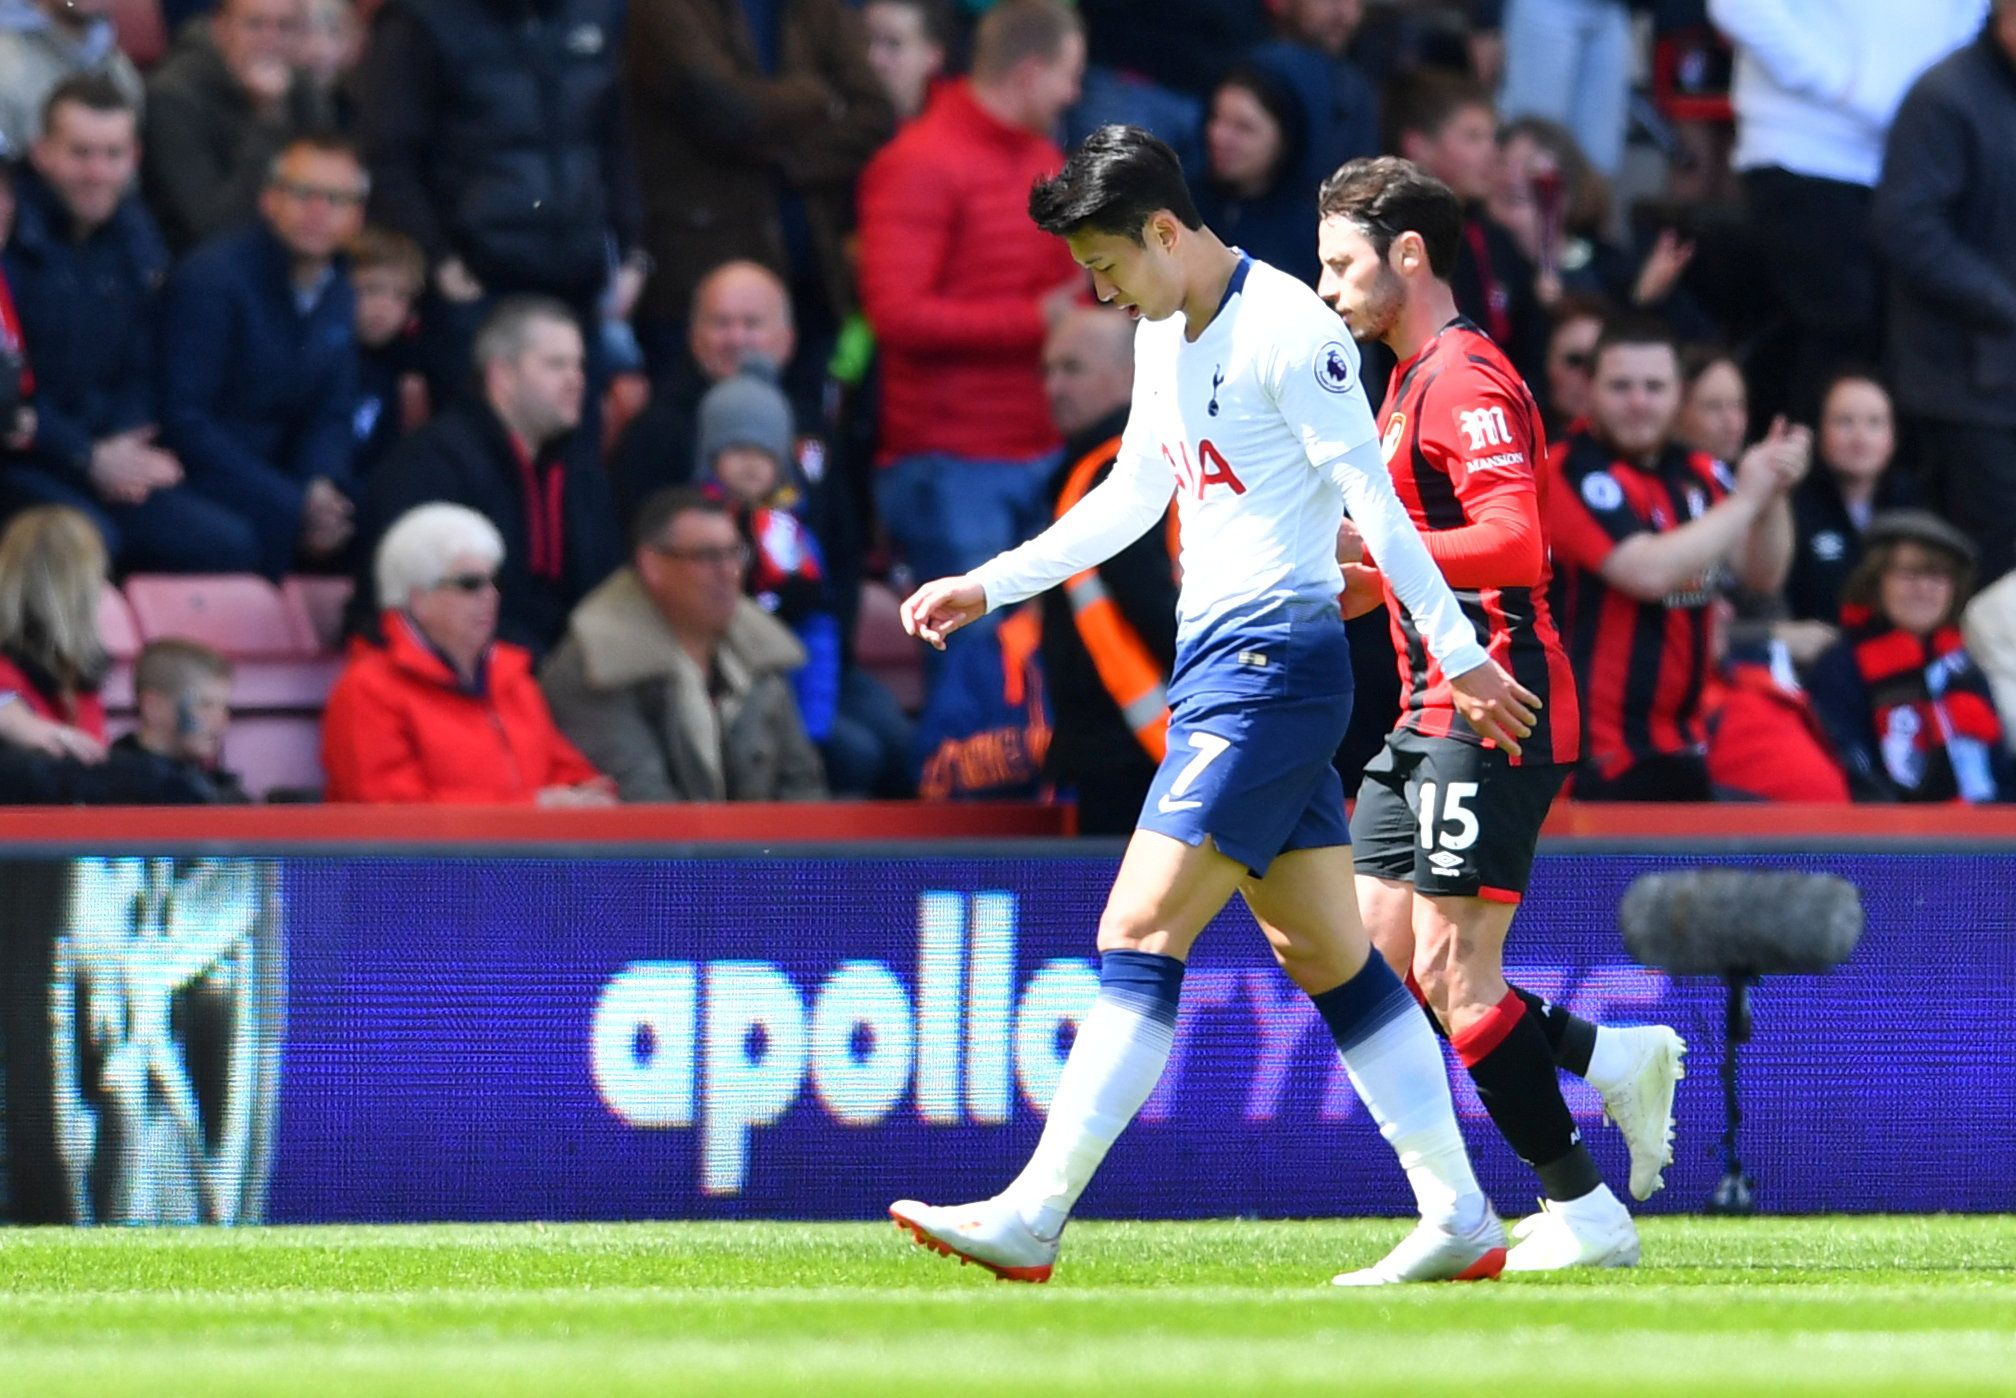 Soccer Football - Premier League - AFC Bournemouth v Tottenham Hotspur - Vitality Stadium, Bournemouth, Britain - May 4, 2019  Tottenham's Son Heung-min looks dejected as he walks off after being shown a red card  REUTERS/Dylan Martinez  EDITORIAL USE ONLY. No use with unauthorized audio, video, data, fixture lists, club/league logos or 